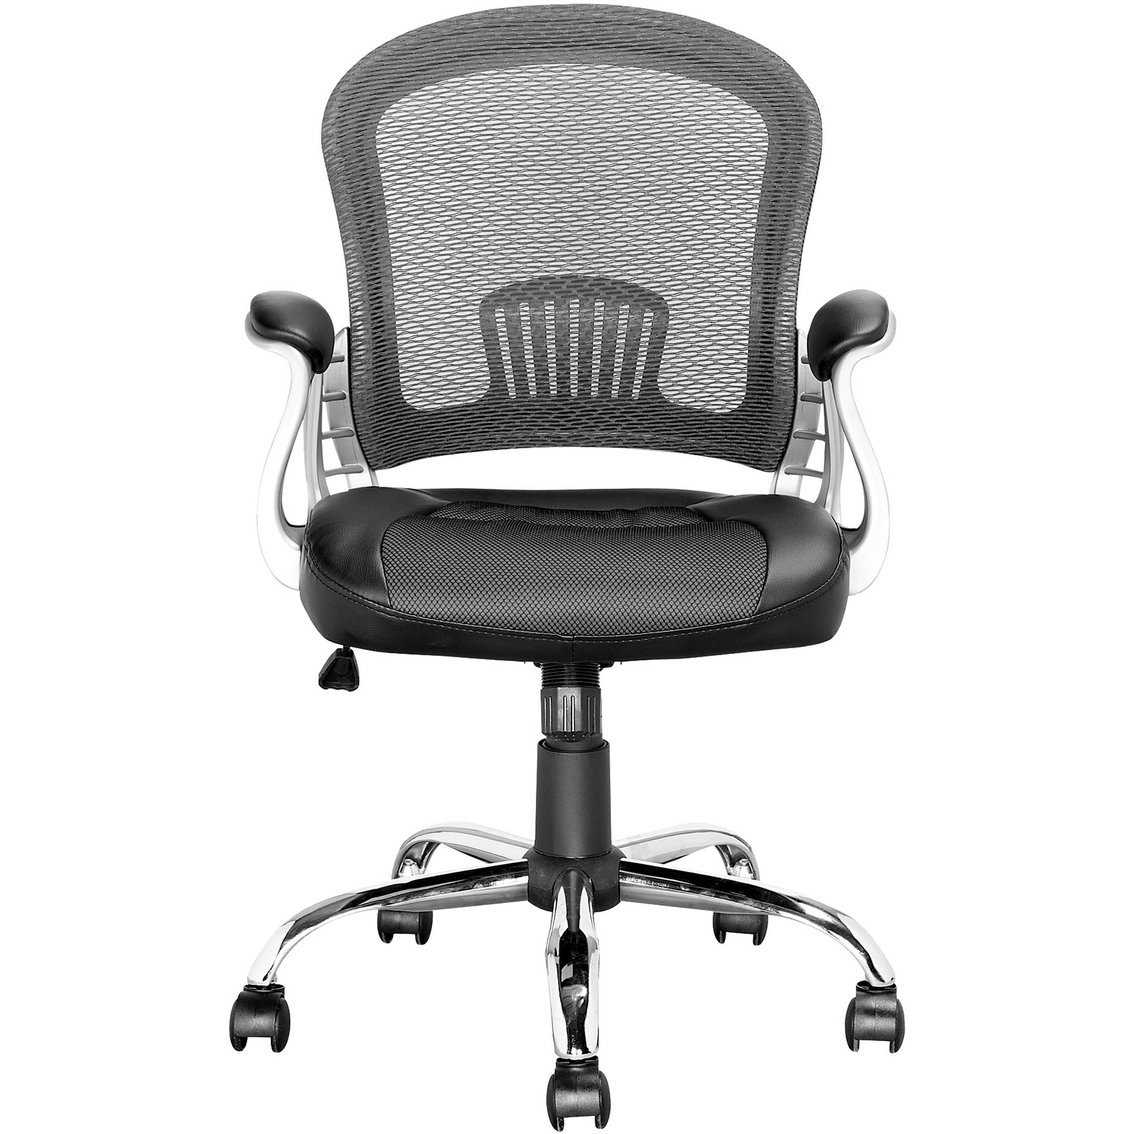 CorLiving Black Leatherette Office Chair - Image 3 of 4